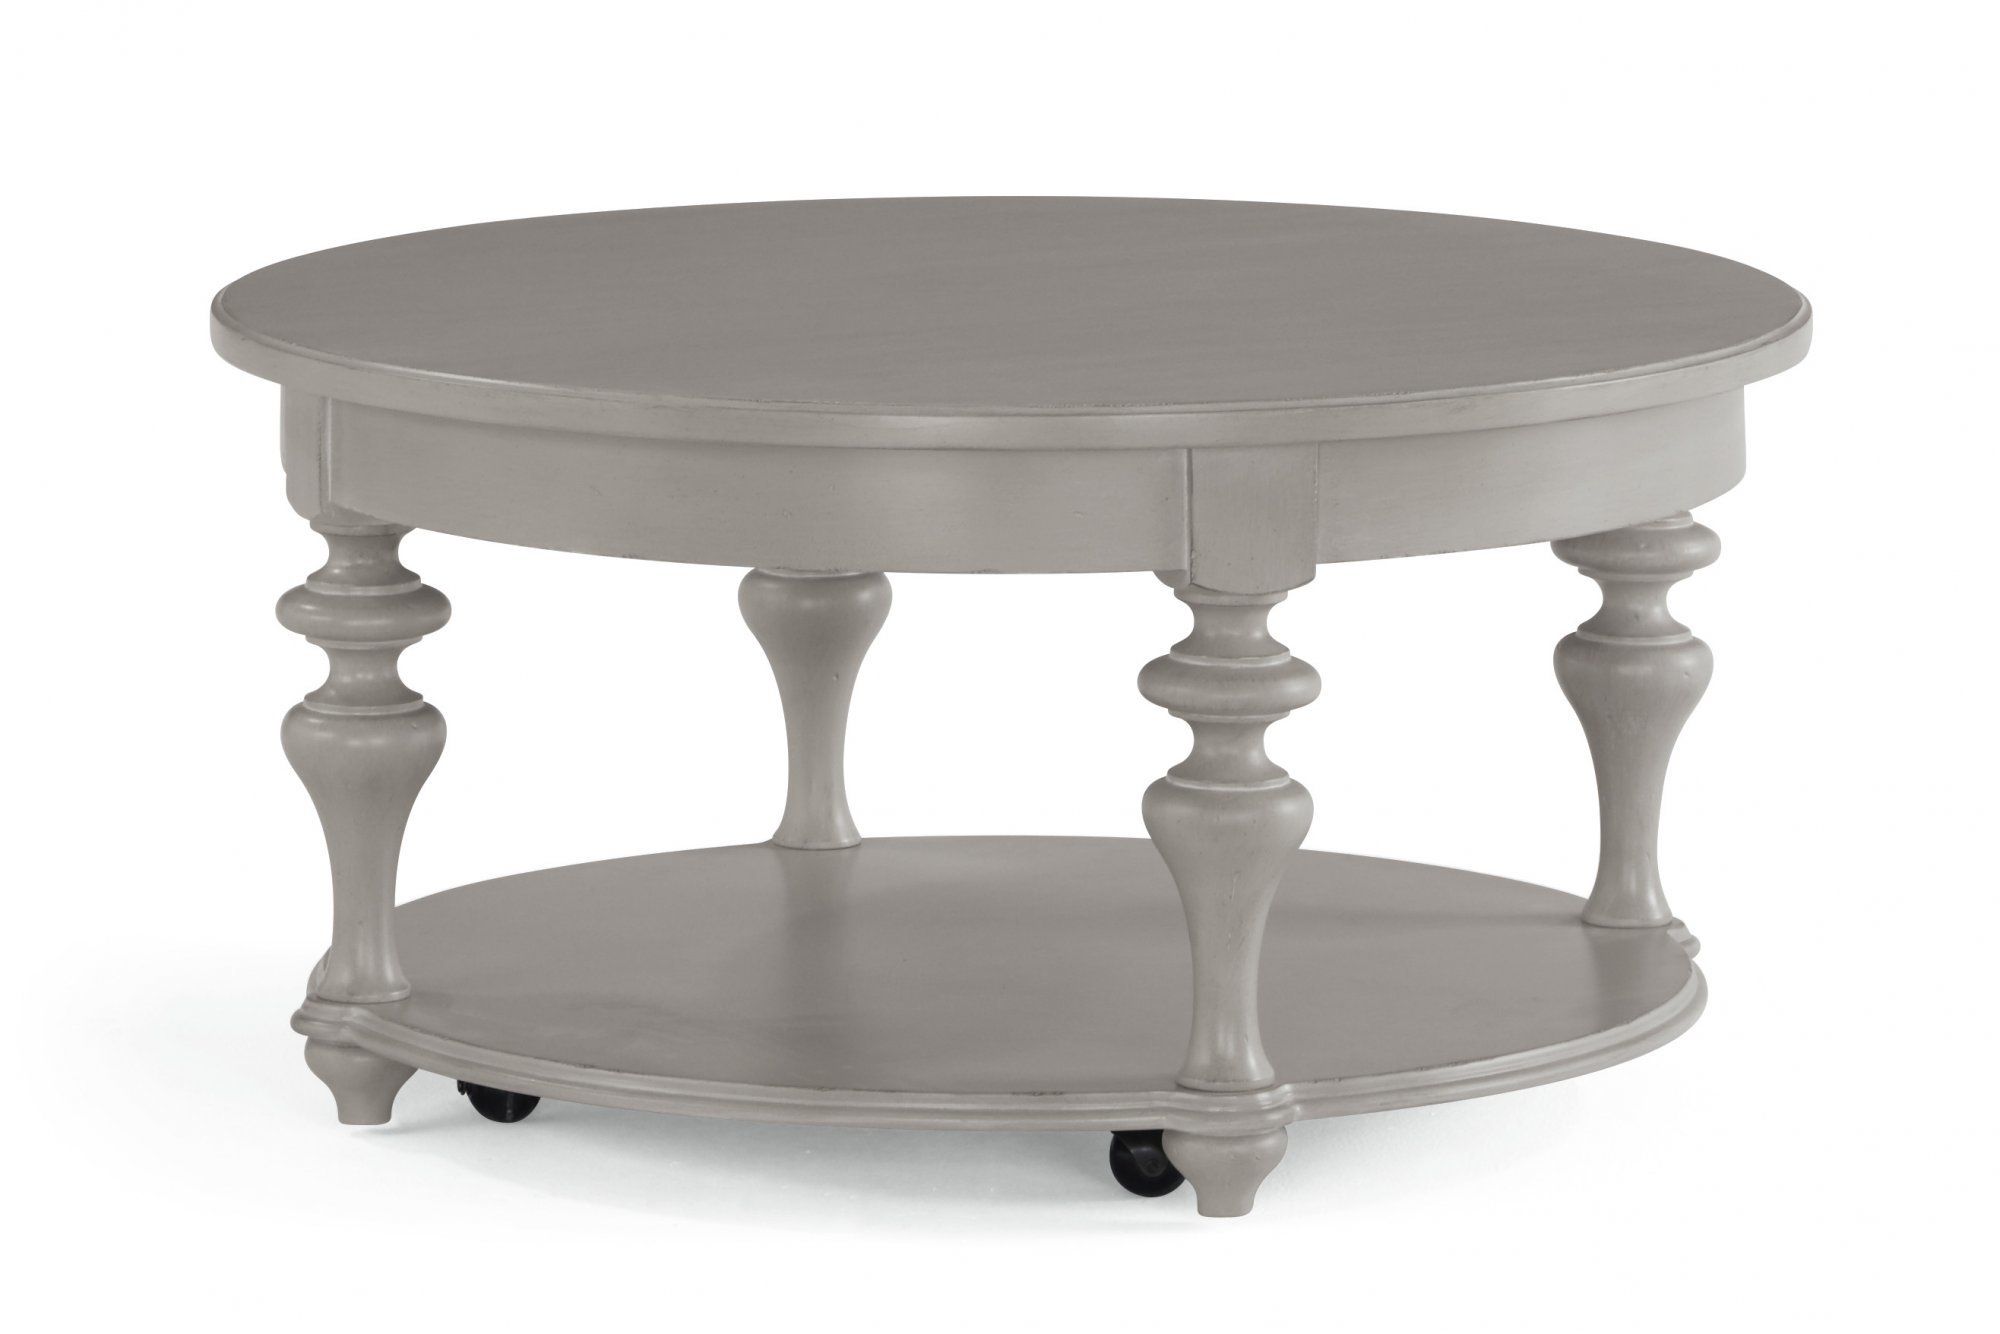 Heirloom Round Coffee Table With Casters W1065 0341flexsteel Throughout Coffee Tables With Casters (View 15 of 15)